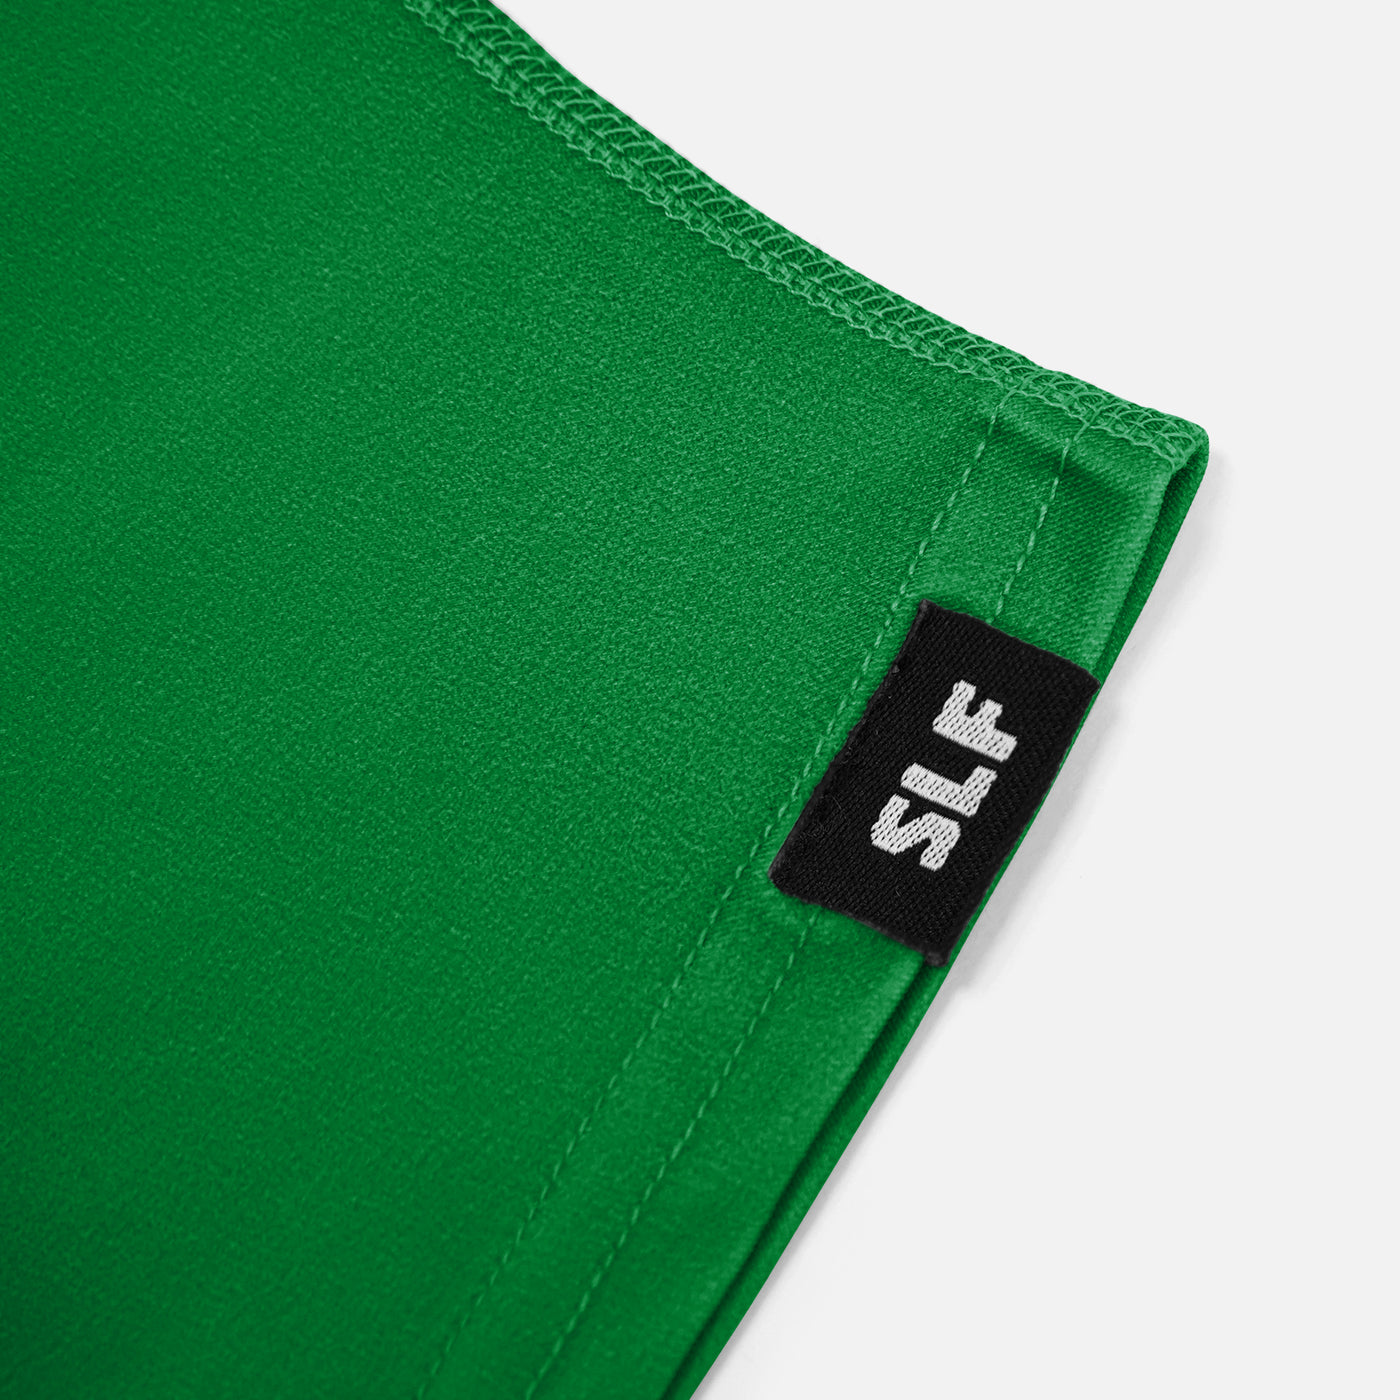 Hue Green Spats / Cleat Covers